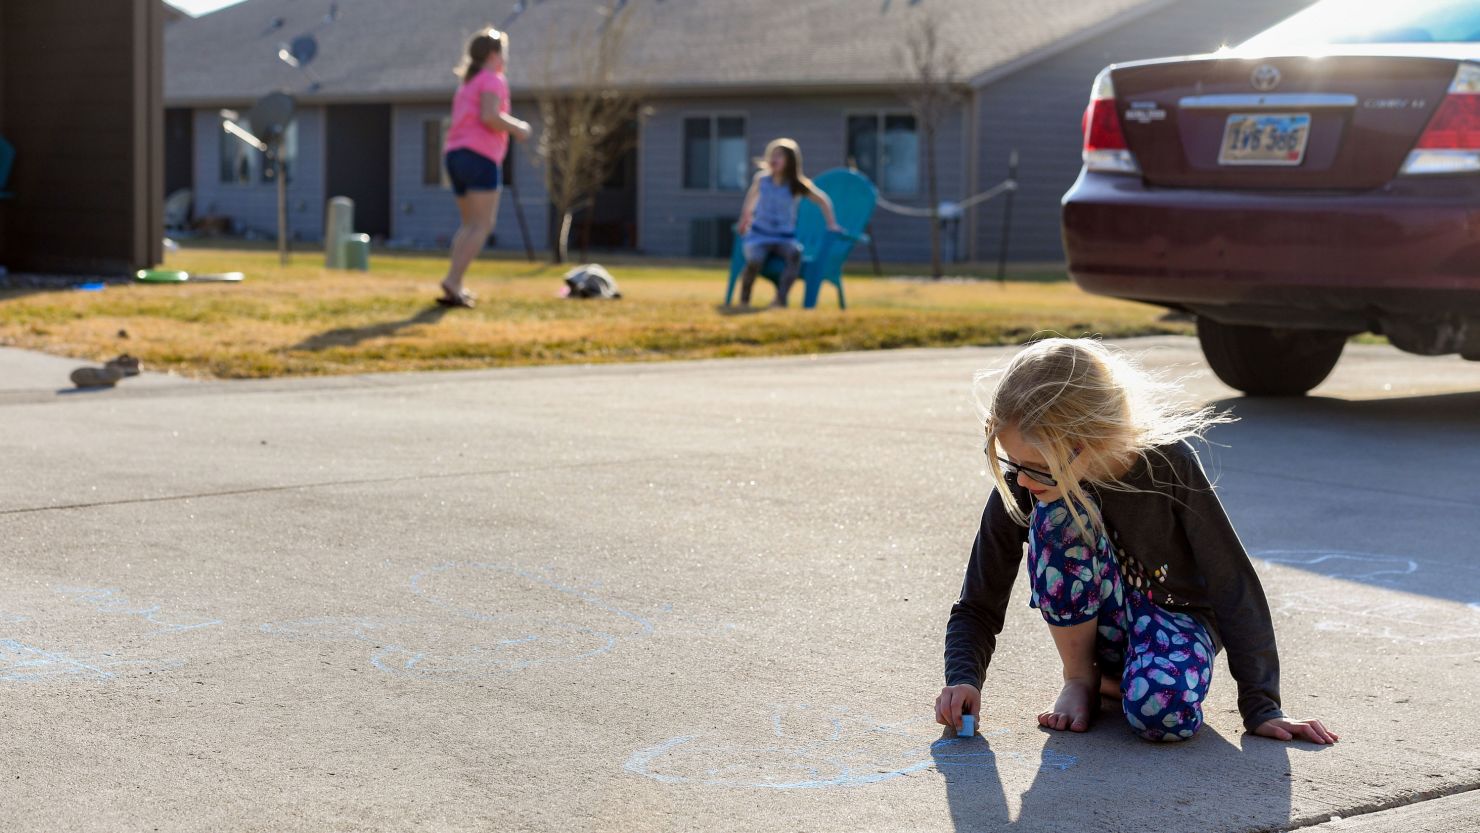 Lexus Larson, age 8, draws with sidewalk chalk outside her house while her friends, Maliah, 10, and Makinley Walsh, 7, play in their own yard across the street on Monday, April 6, in Sioux Falls, South Dakota.